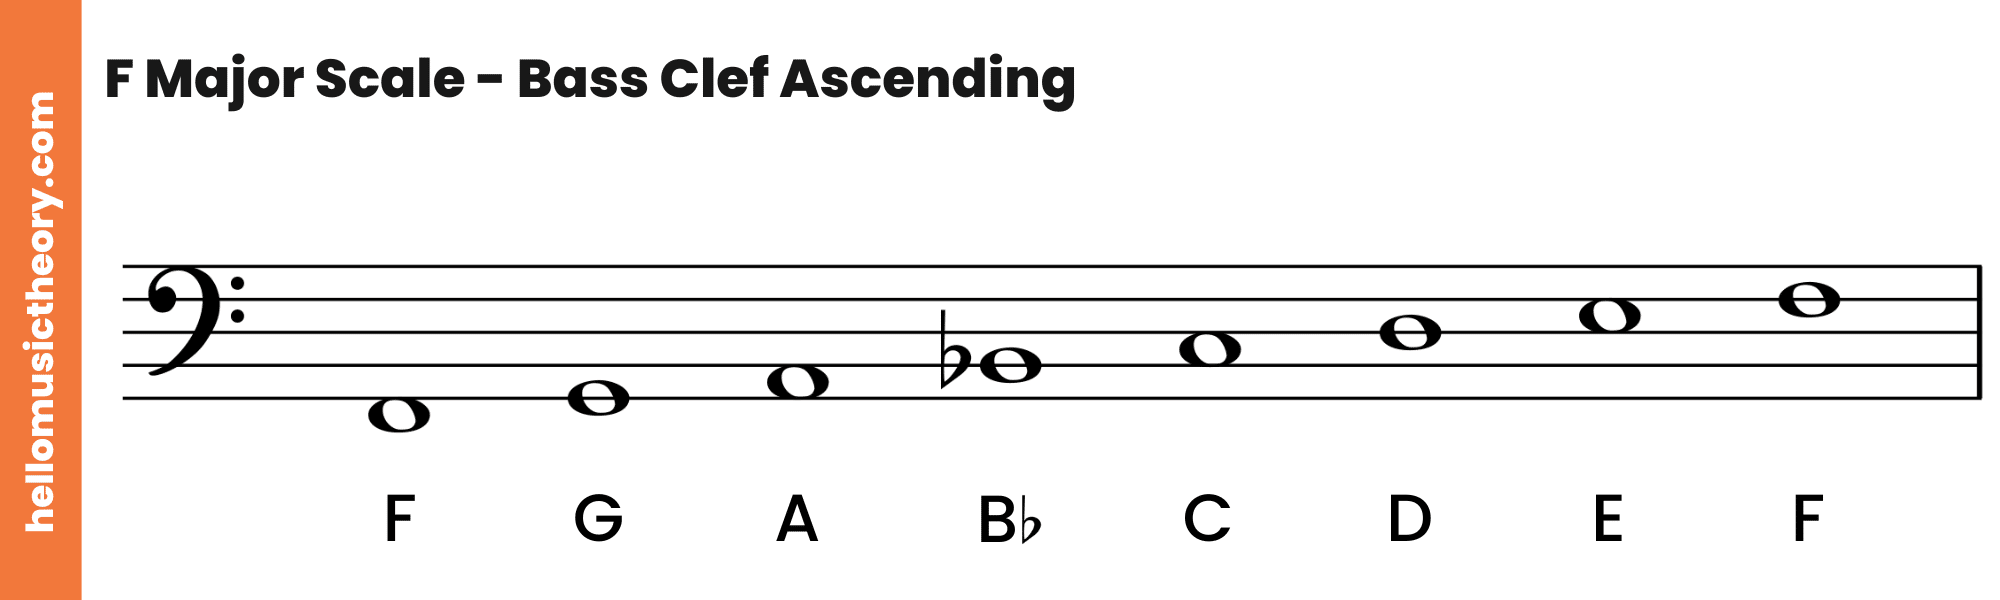 F Major Scale Bass Clef Ascending